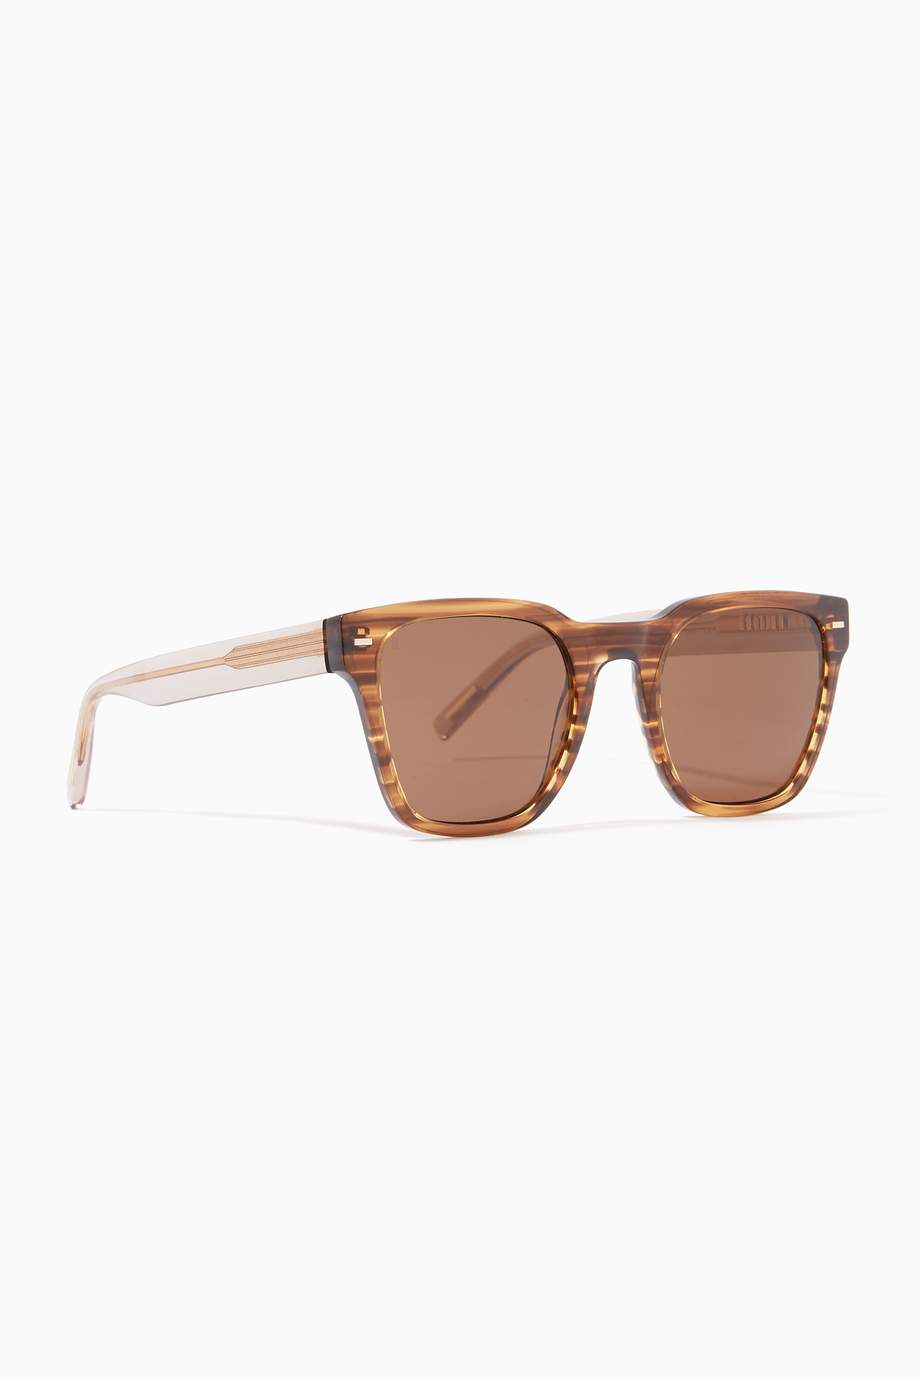 Shop Jimmy Fairly Brown The E-010 Sunglasses in Acetate for Women ...